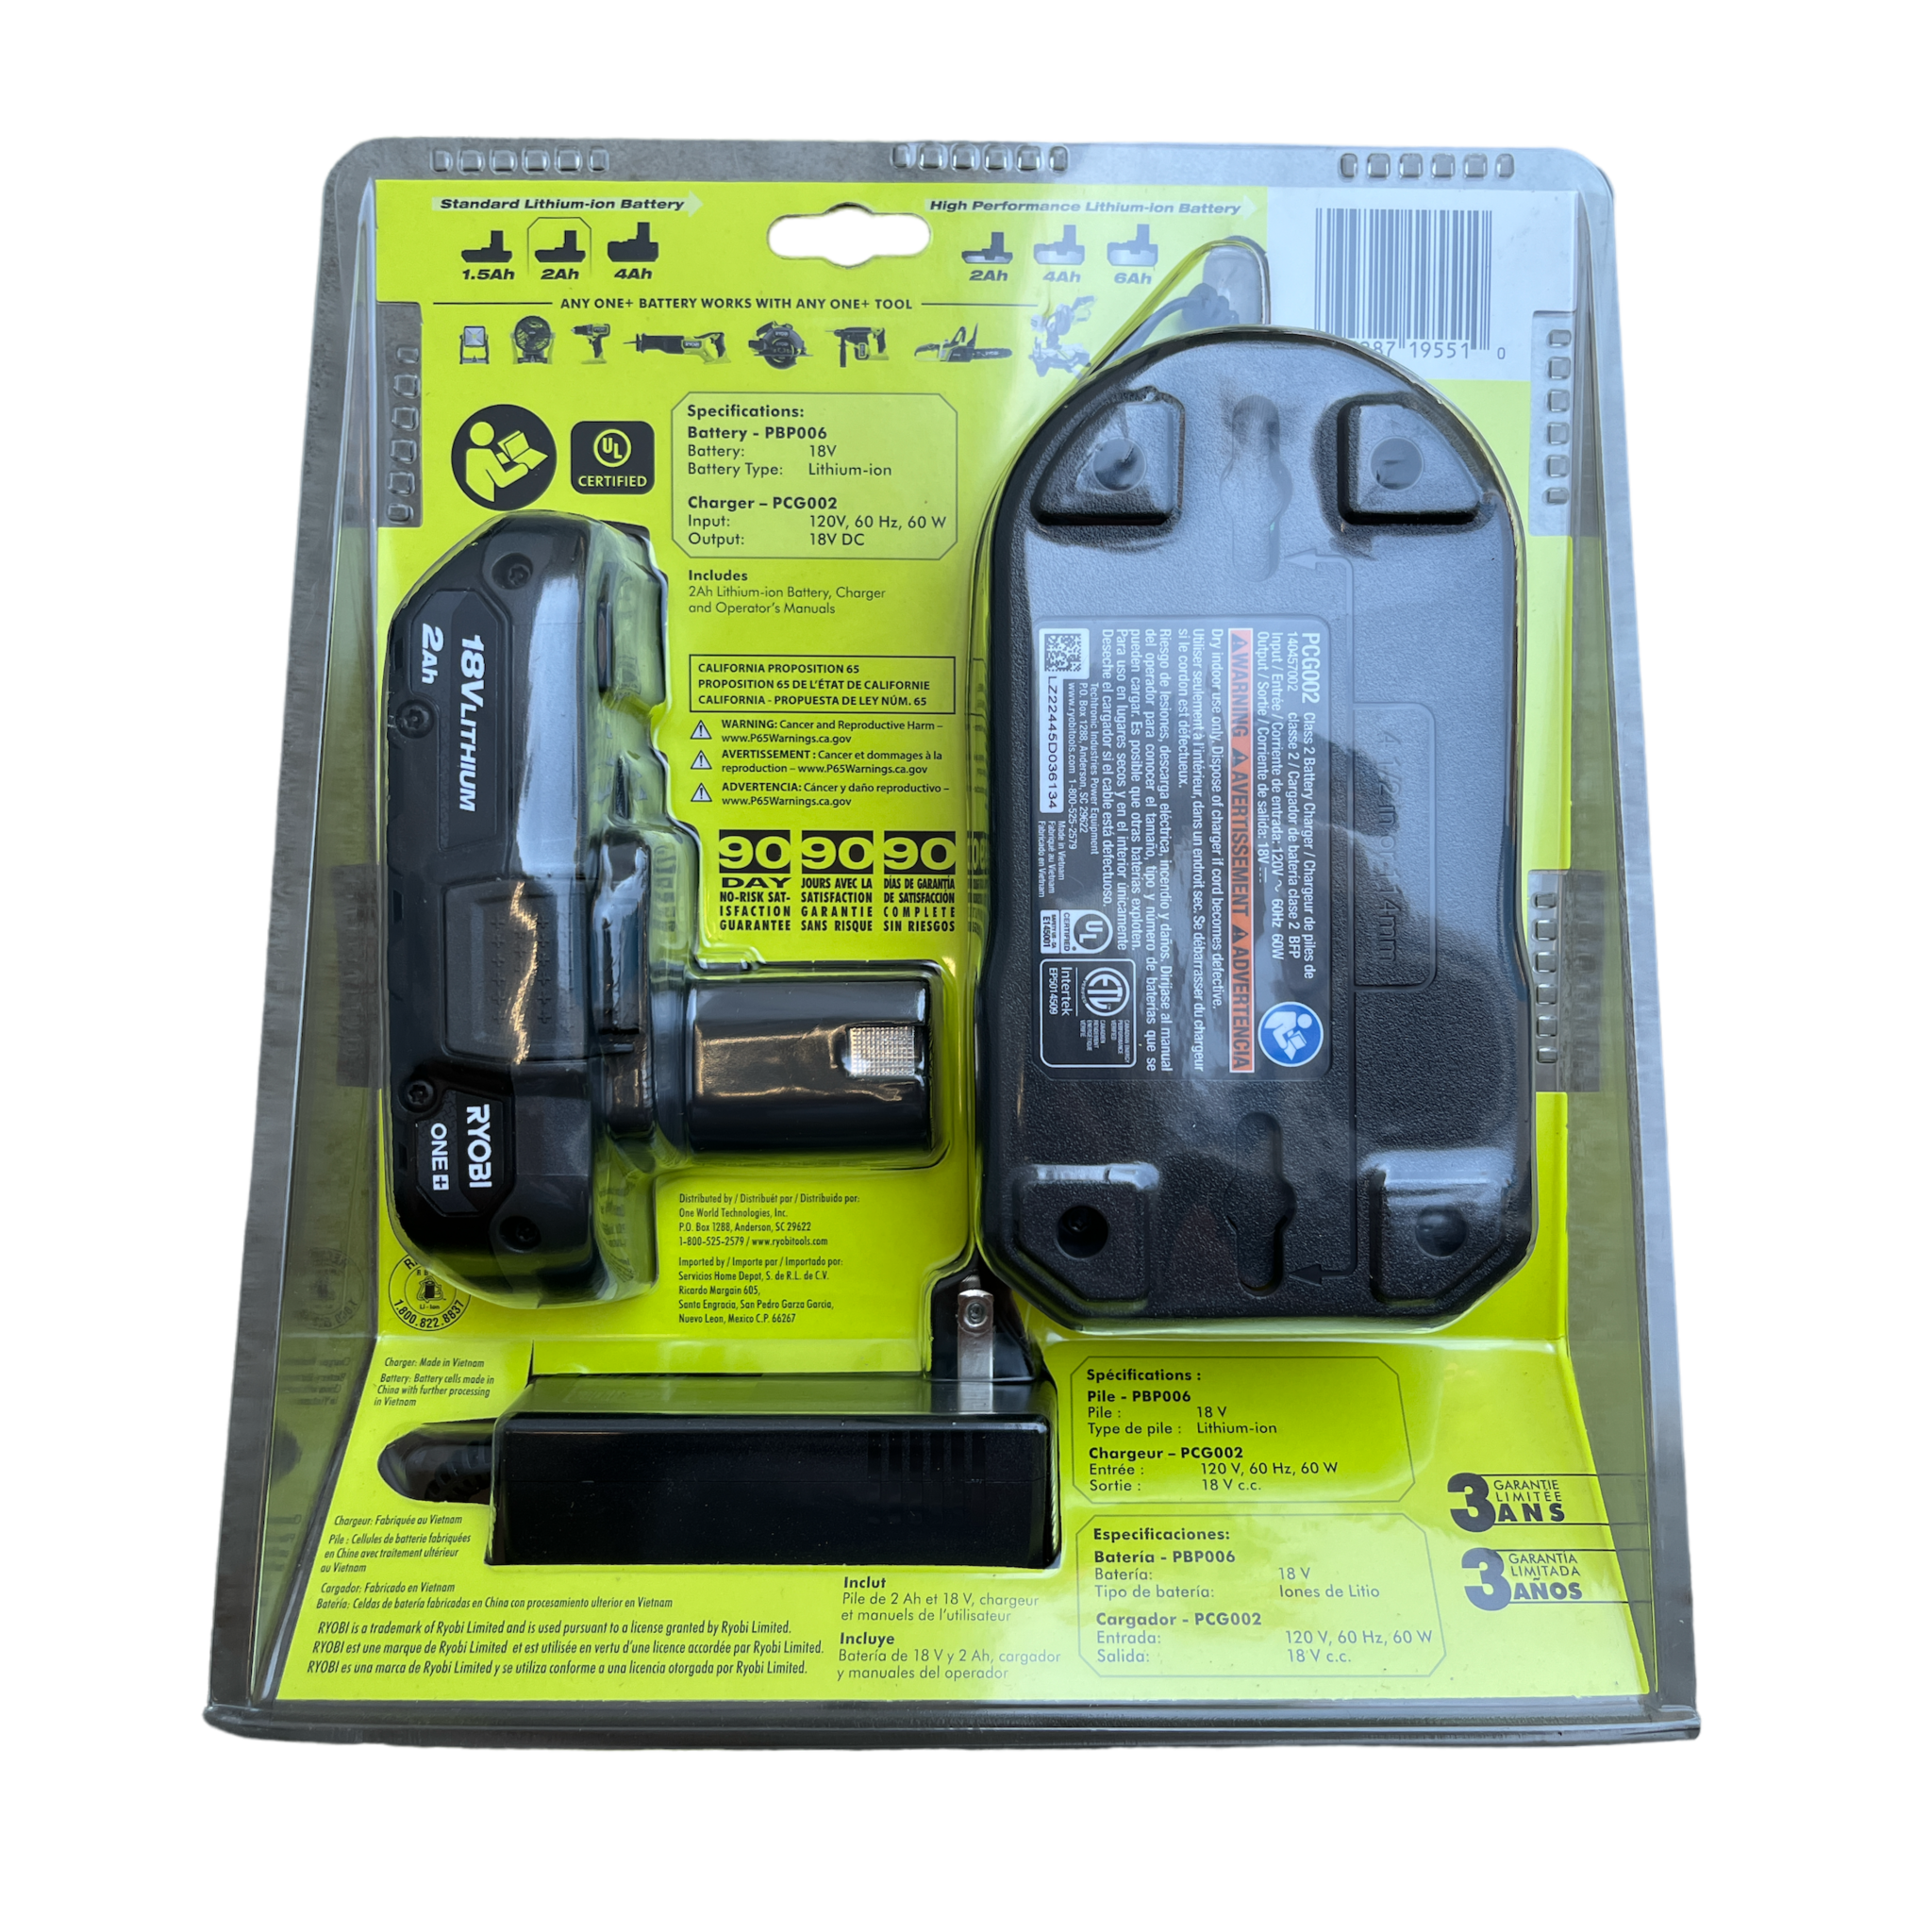 ONE+ 18V Lithium-Ion 2.0 Ah Compact Battery and Charger Starter Kit